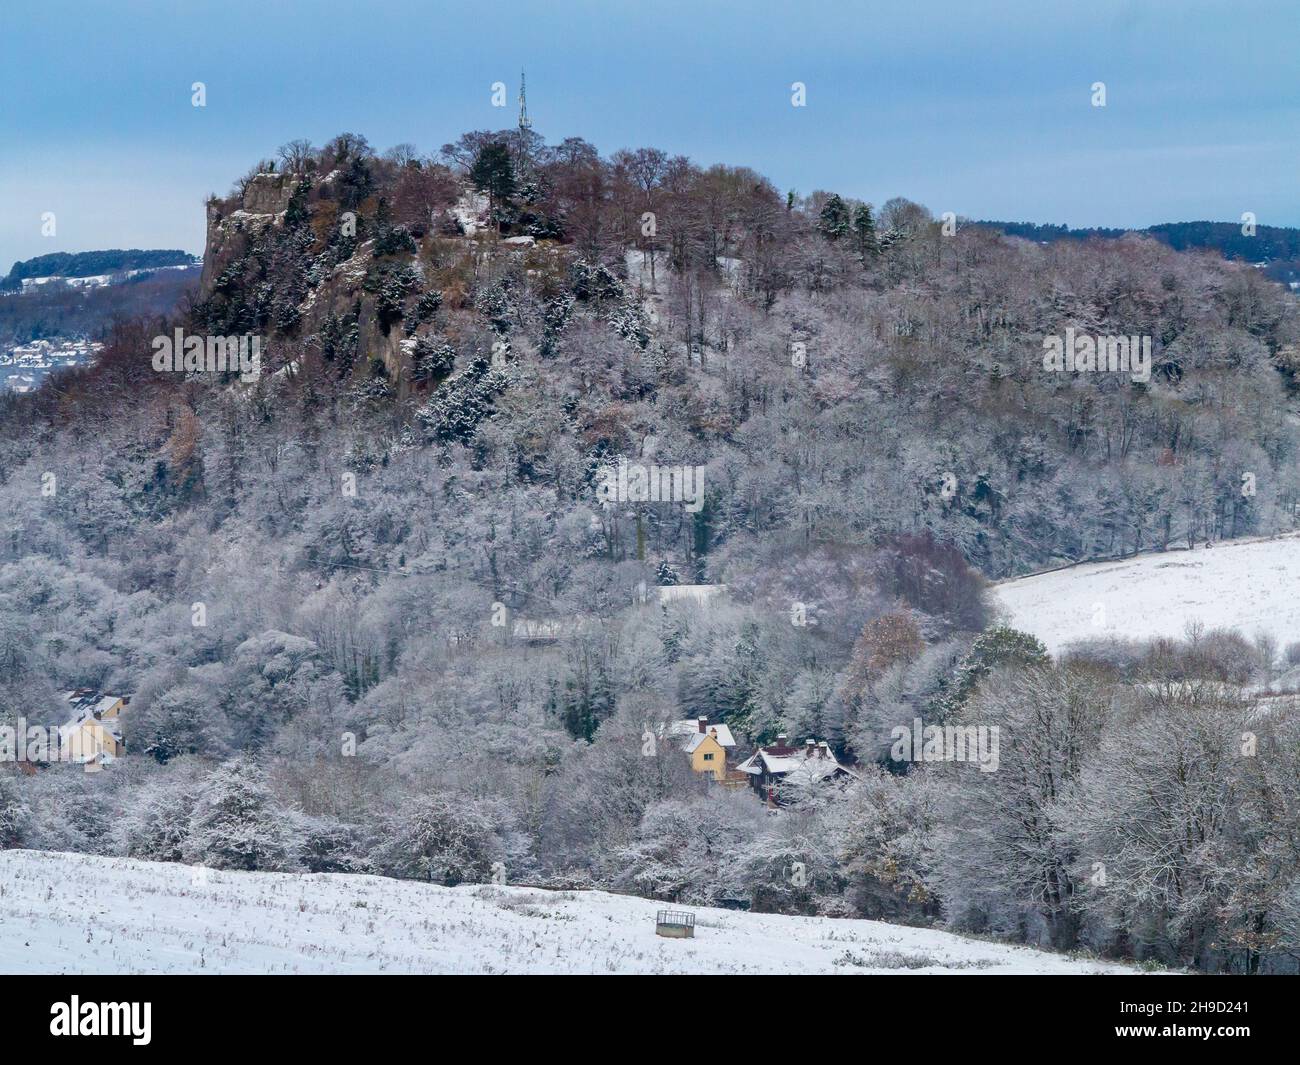 Snow covered landscape with trees at Matlock Bath in the Derbyshire Peak District England UK with High Tor visible in the distance. Stock Photo